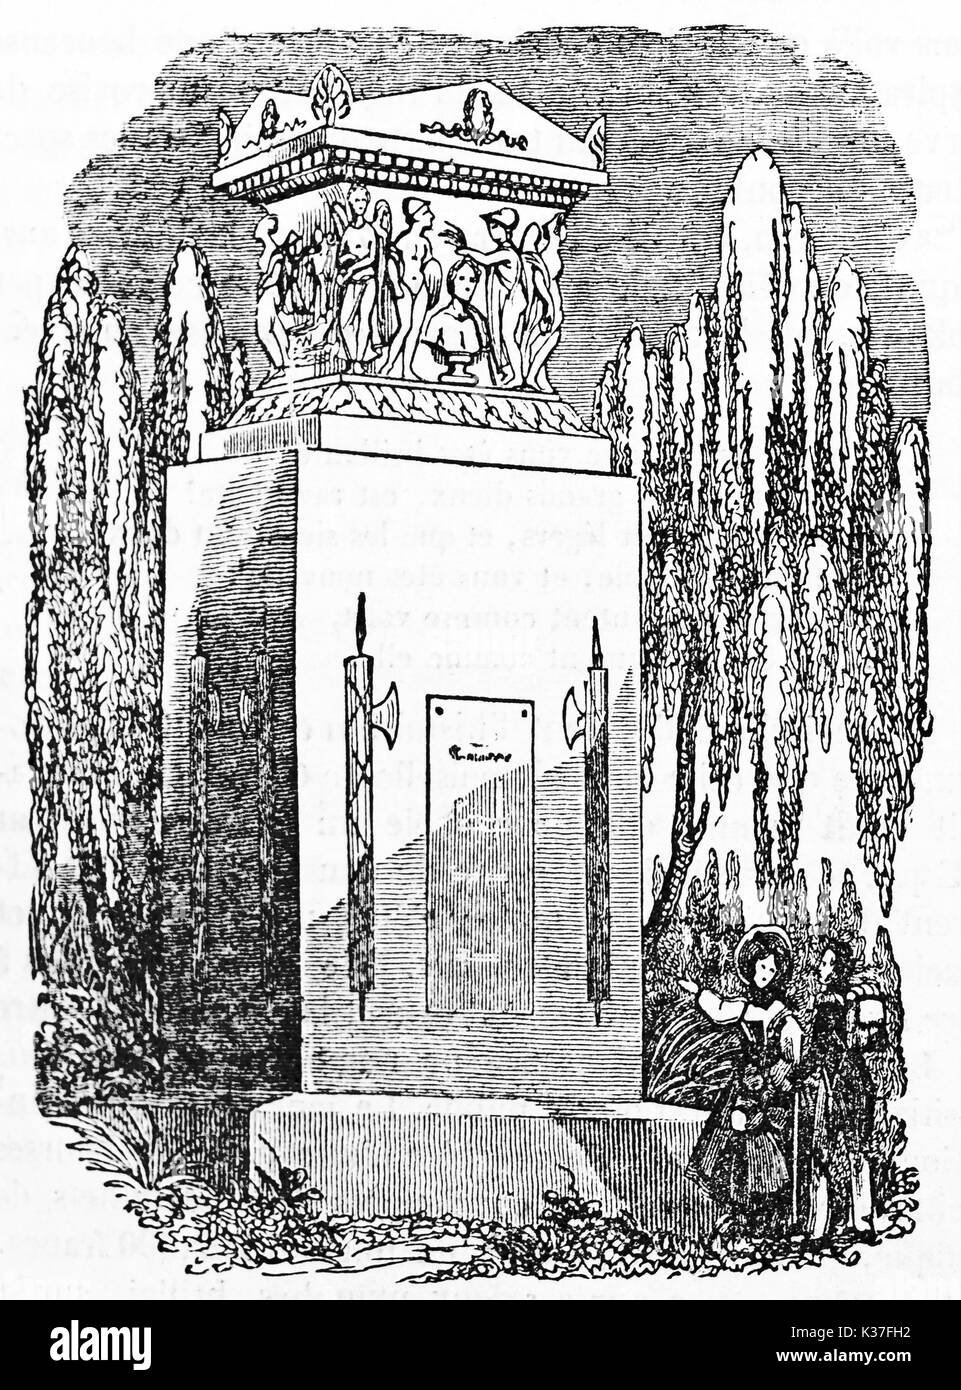 ancient stone monument to General Louis Desaix surrounded by weeping willows, Strasbourg France. Old Illustration by unidentified author published on Magasin Pittoresque Paris 1834 Stock Photo